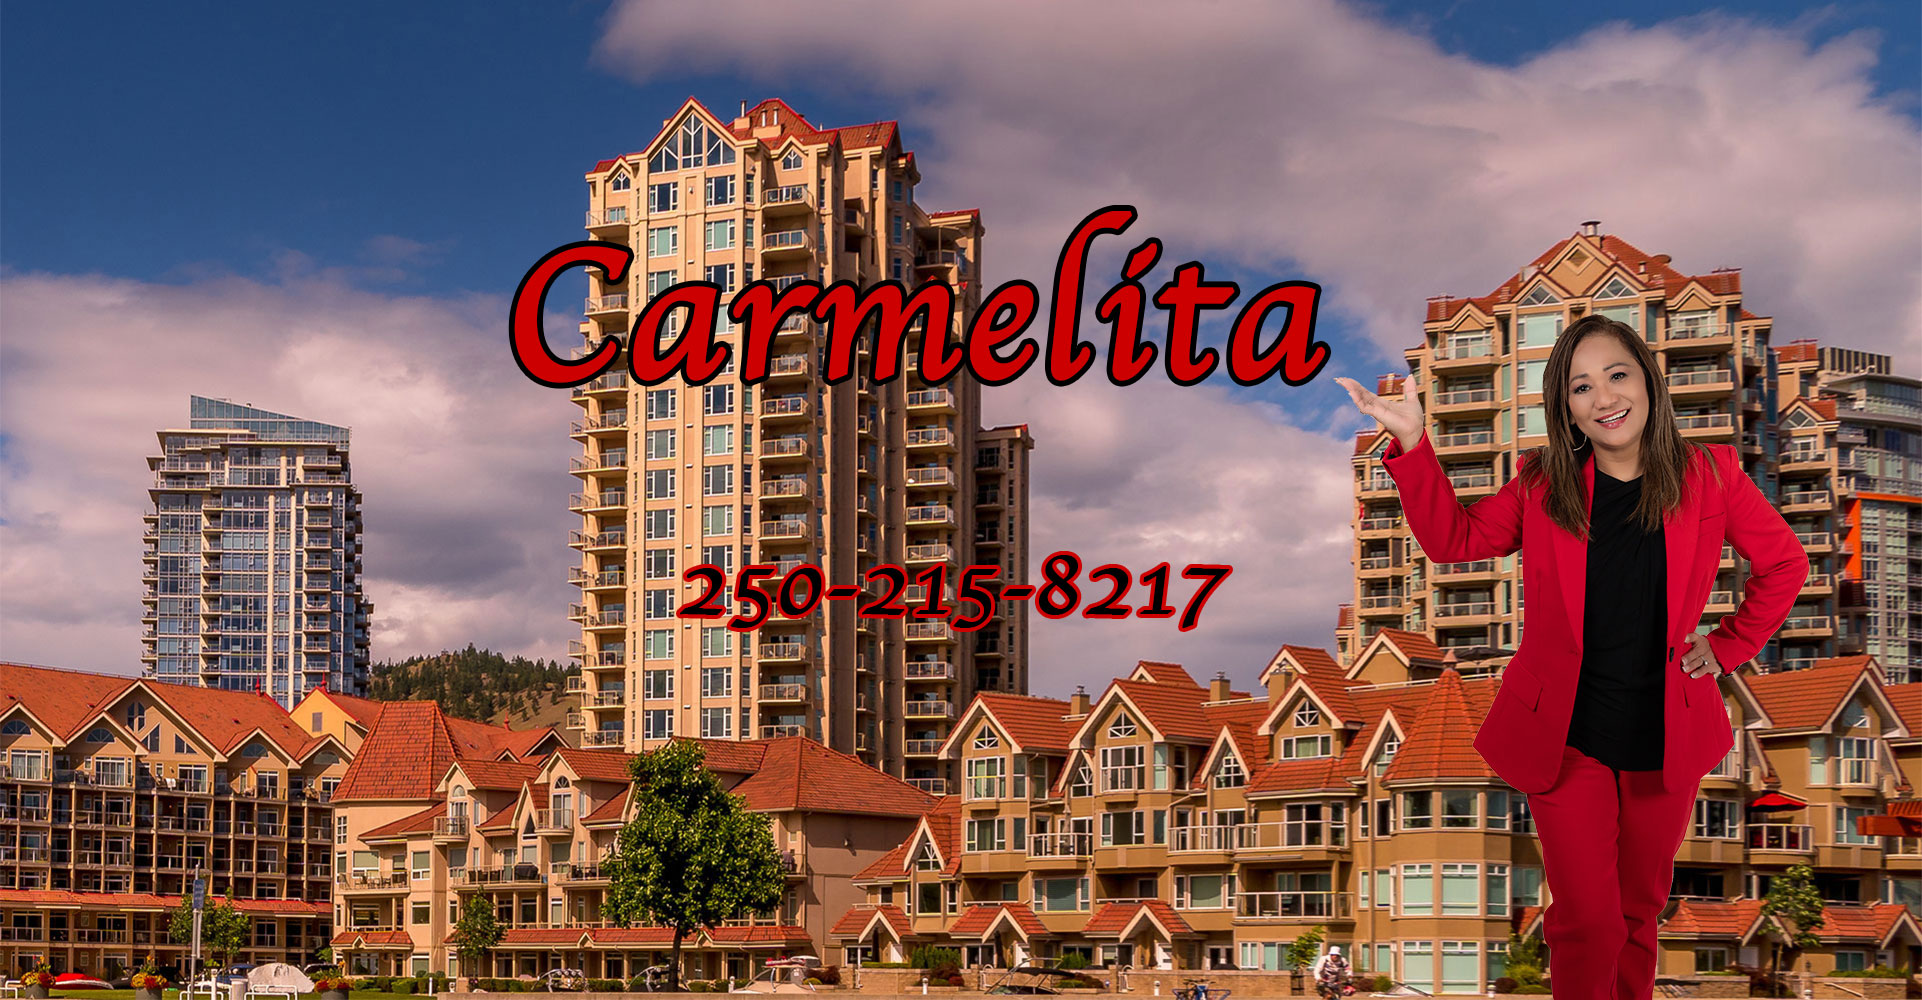 Carmelita has been helping buyers and sellers with Okanagan real estate property for over 20 years.